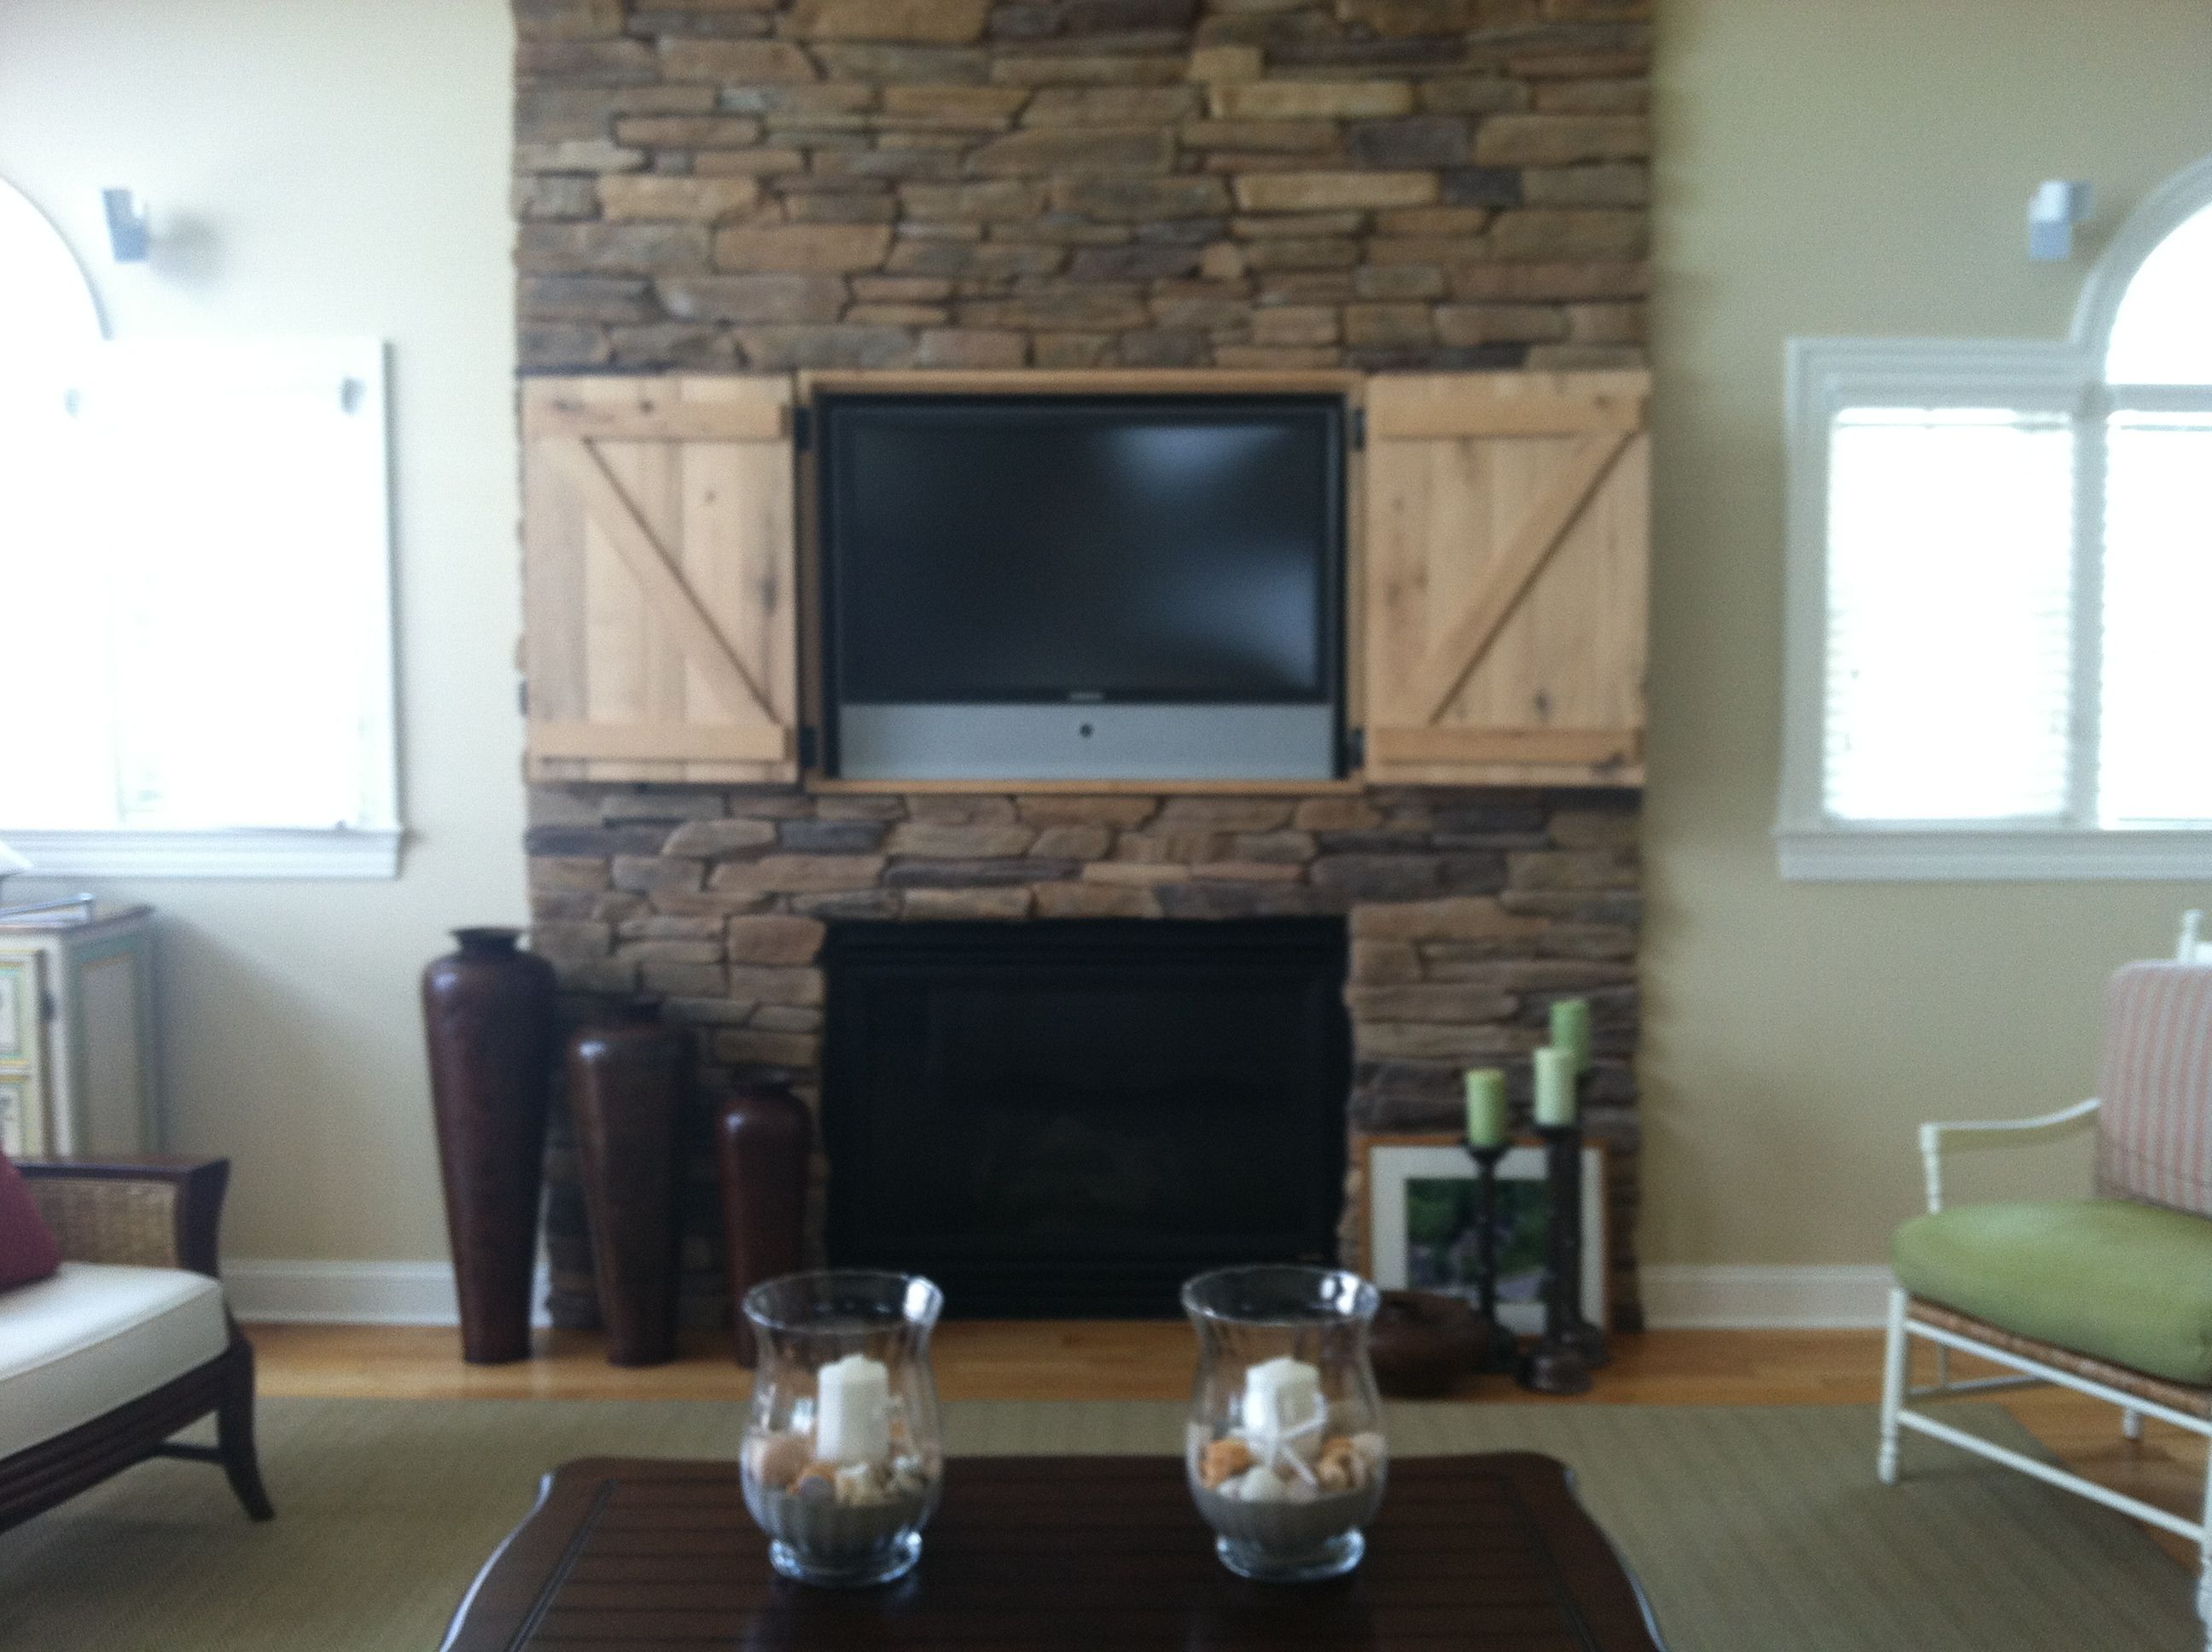 Picture Above Fireplace Lovely Hidden Tv Over Fireplace Open Doors Decor and Design